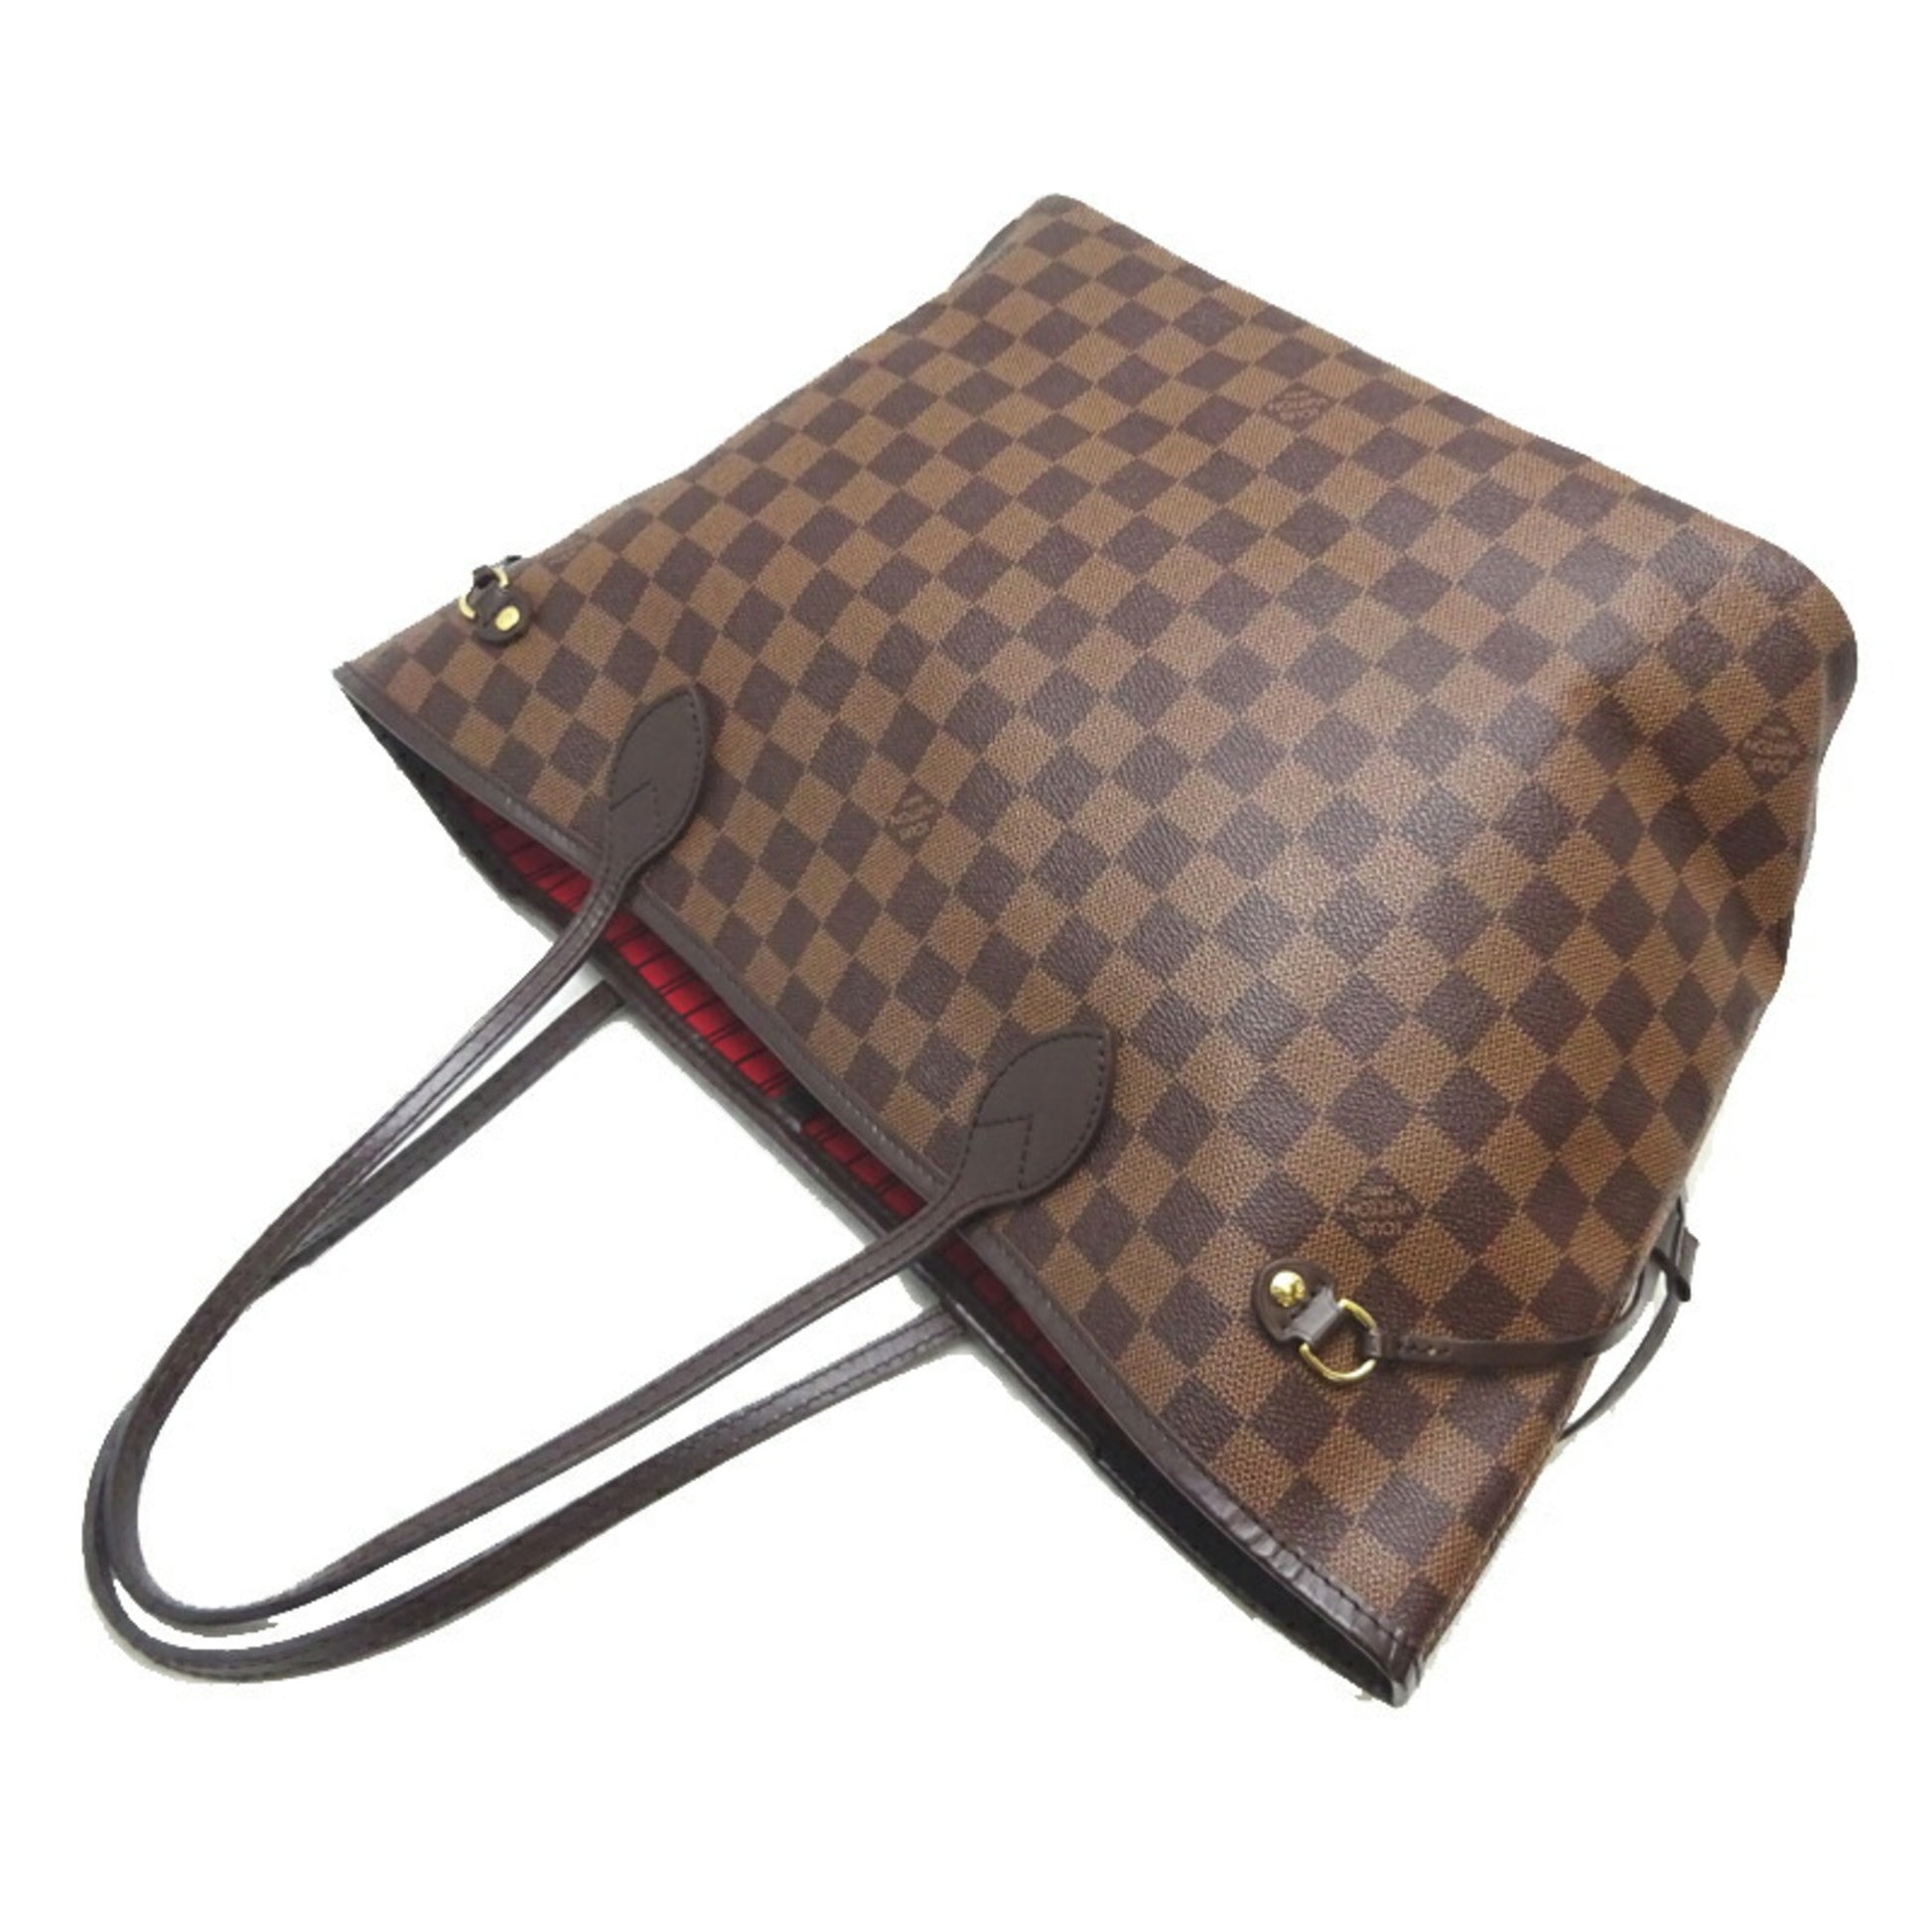 LOUIS VUITTON LOUIS VUITTON Neverfull MM Shoulder tote bag N41358 Damier  Ebene Used LV GHW N41358｜Product Code：2104101991514｜BRAND OFF Online Store